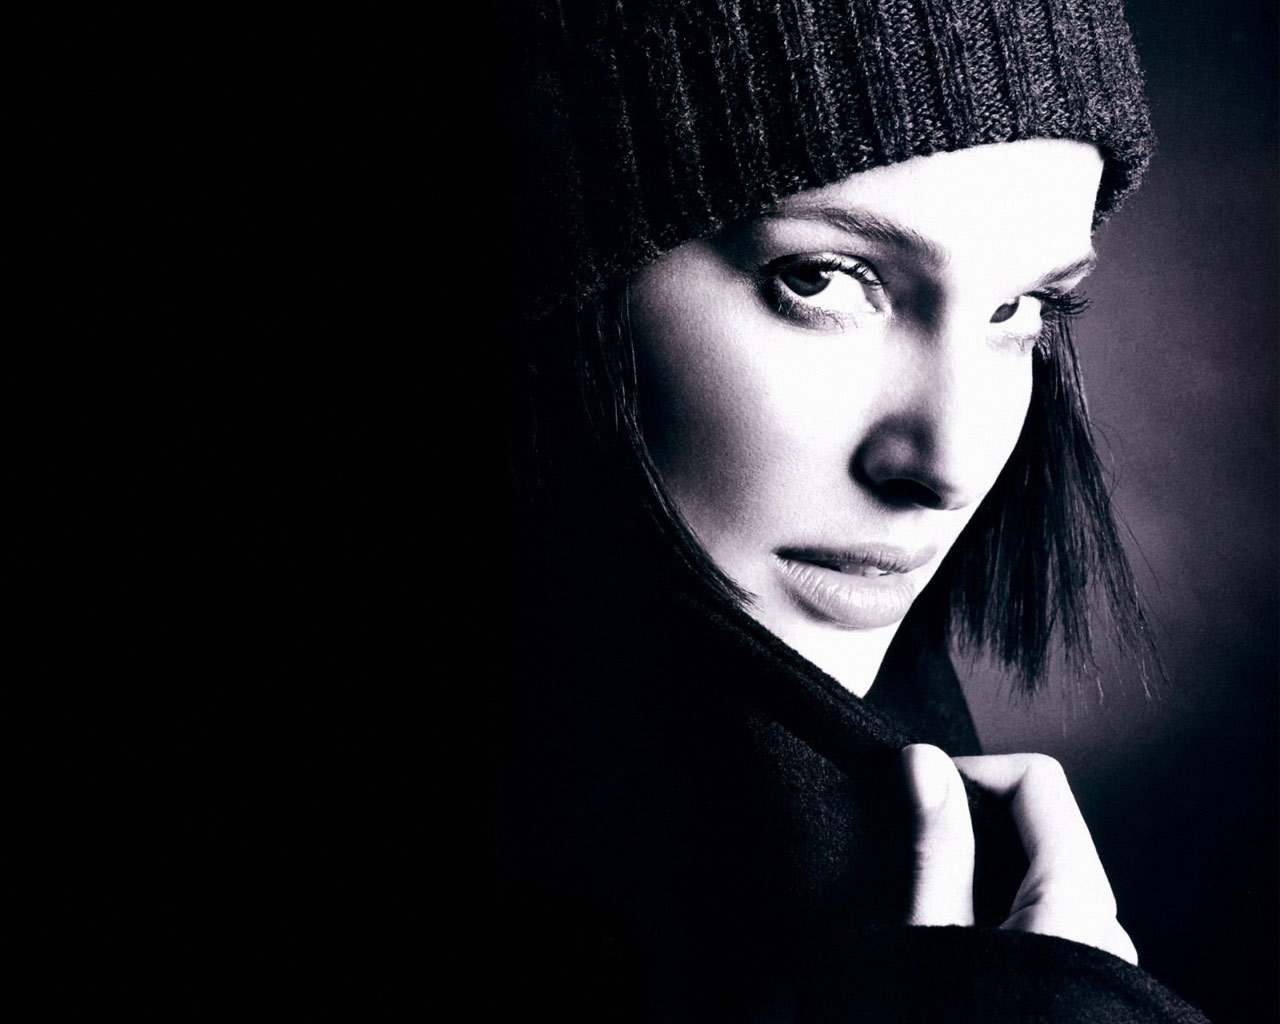 Natalie Portman New Hd Wallpapers 2013 Its All About Wallpapers